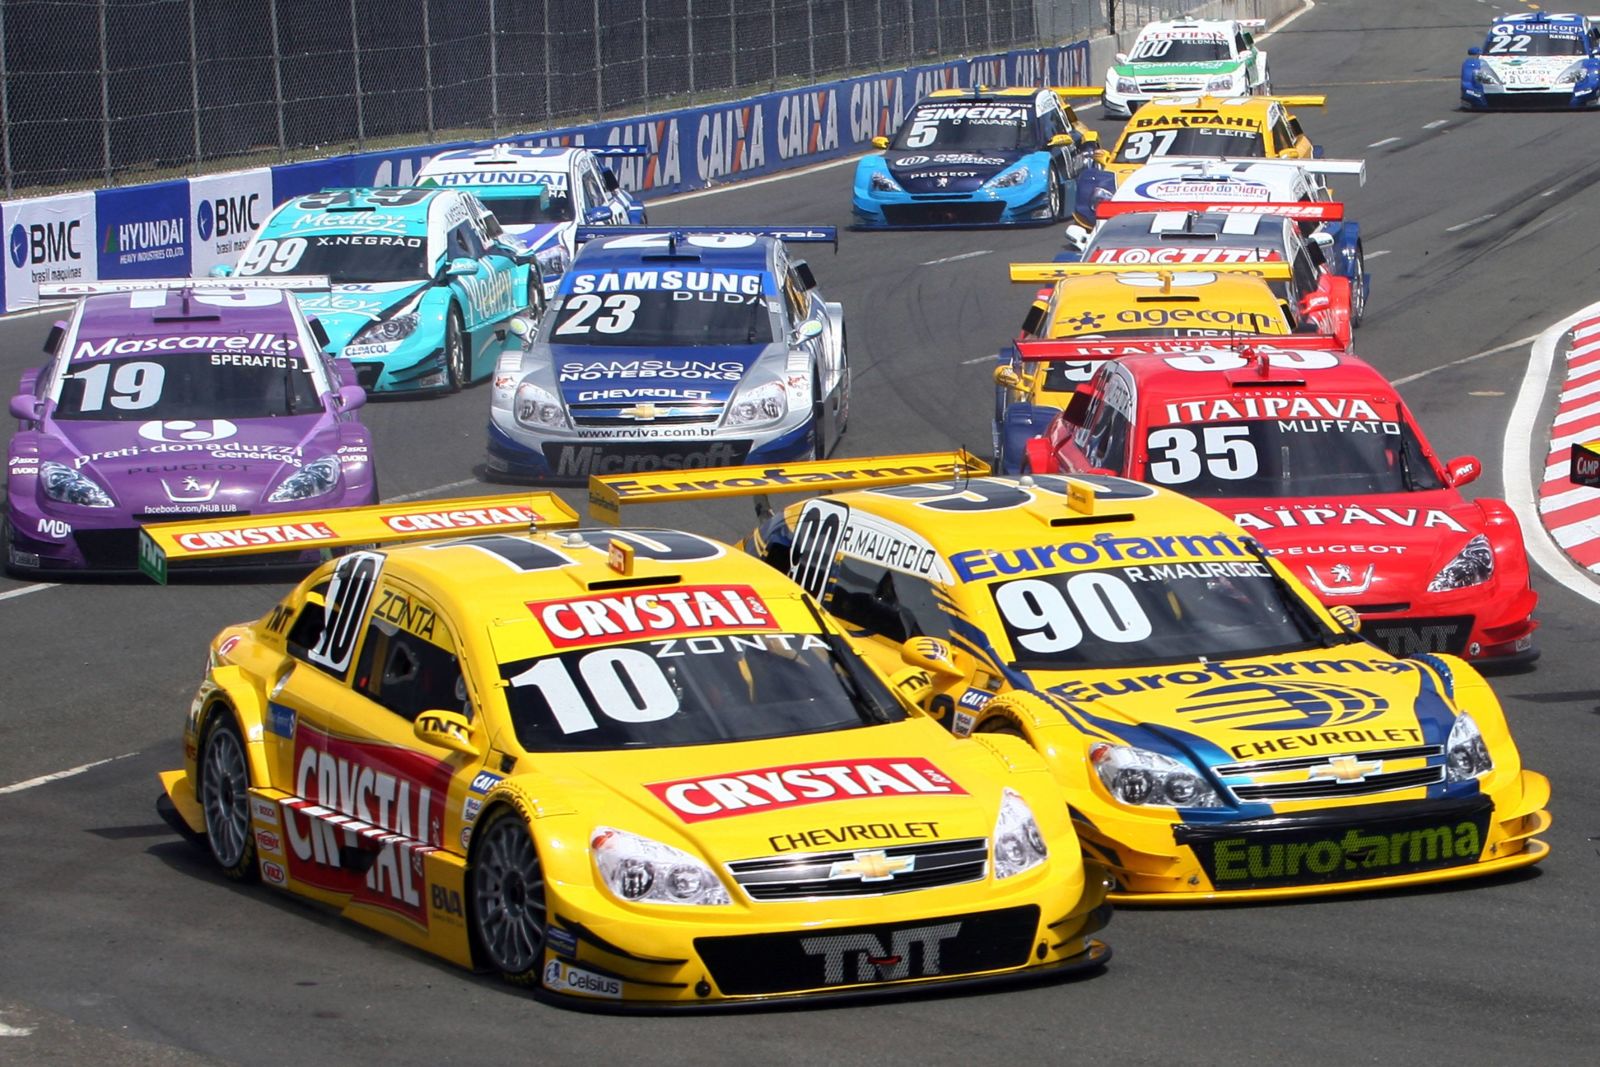 Several Chevrolet Vectras and Peugeot 407s. Battling for first, Ricardo Zonta and R. Maurício.